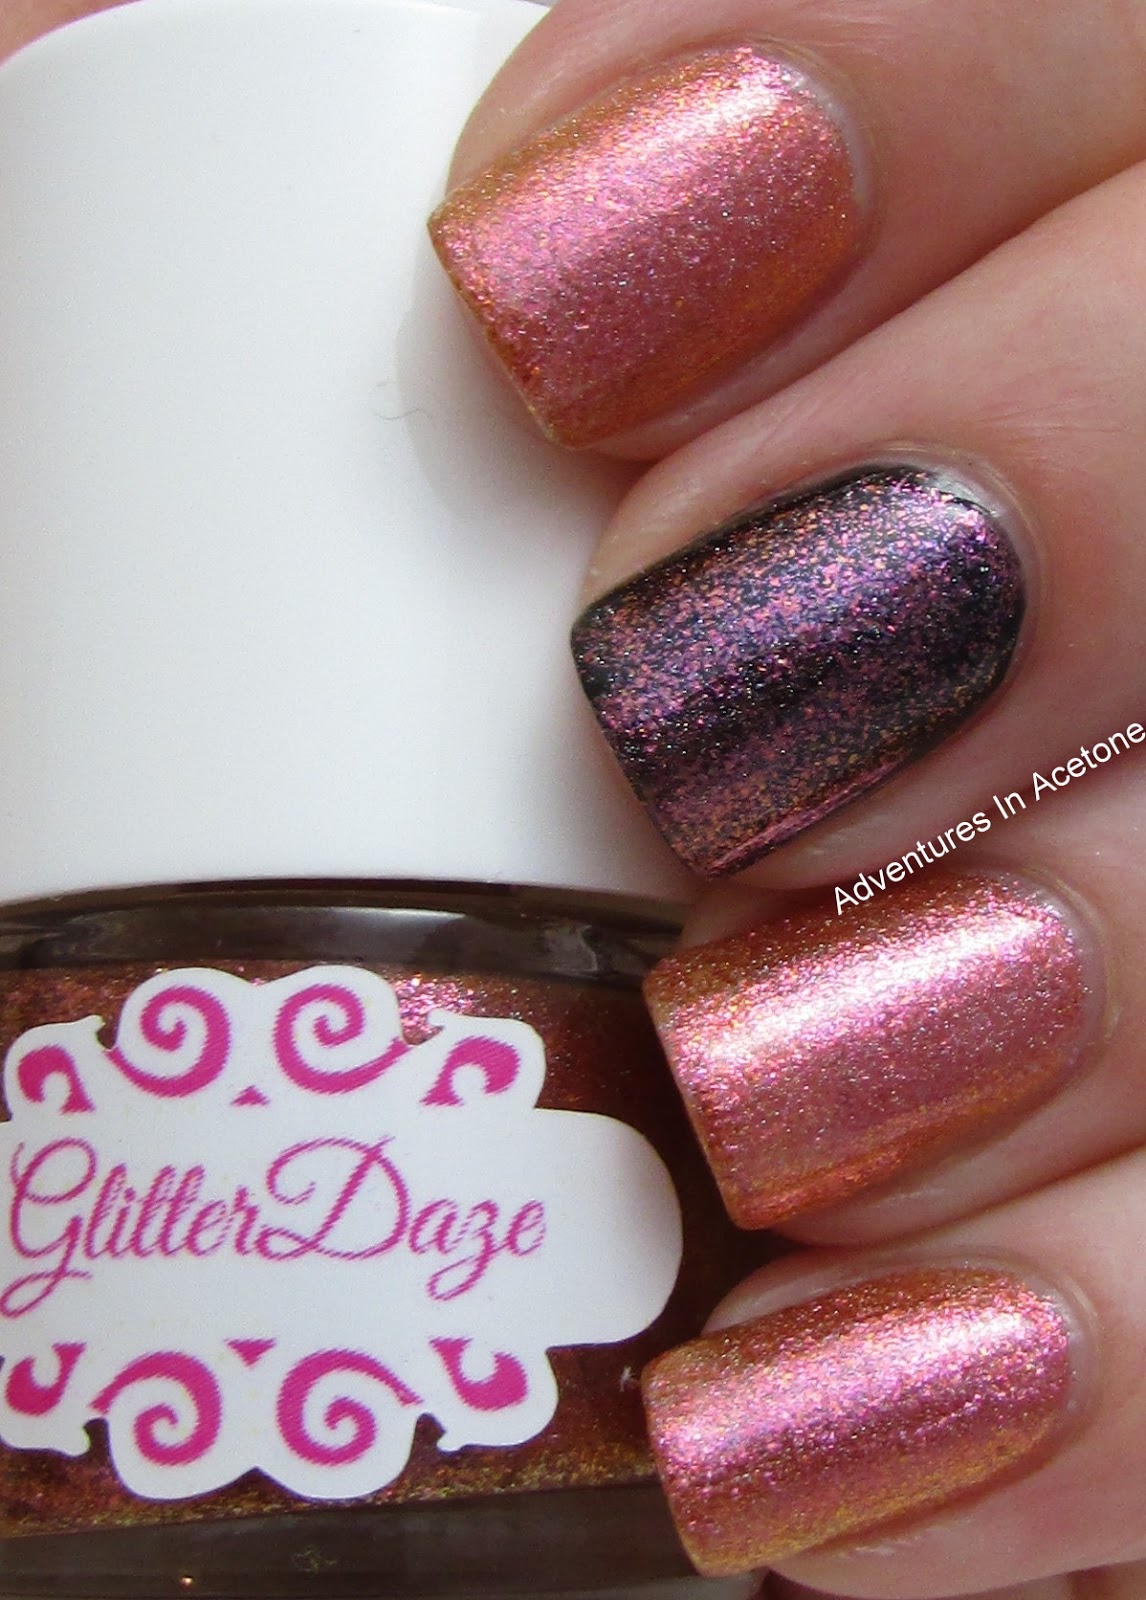 GlitterDaze Sunset In The City Collection Swatches! - Adventures In Acetone